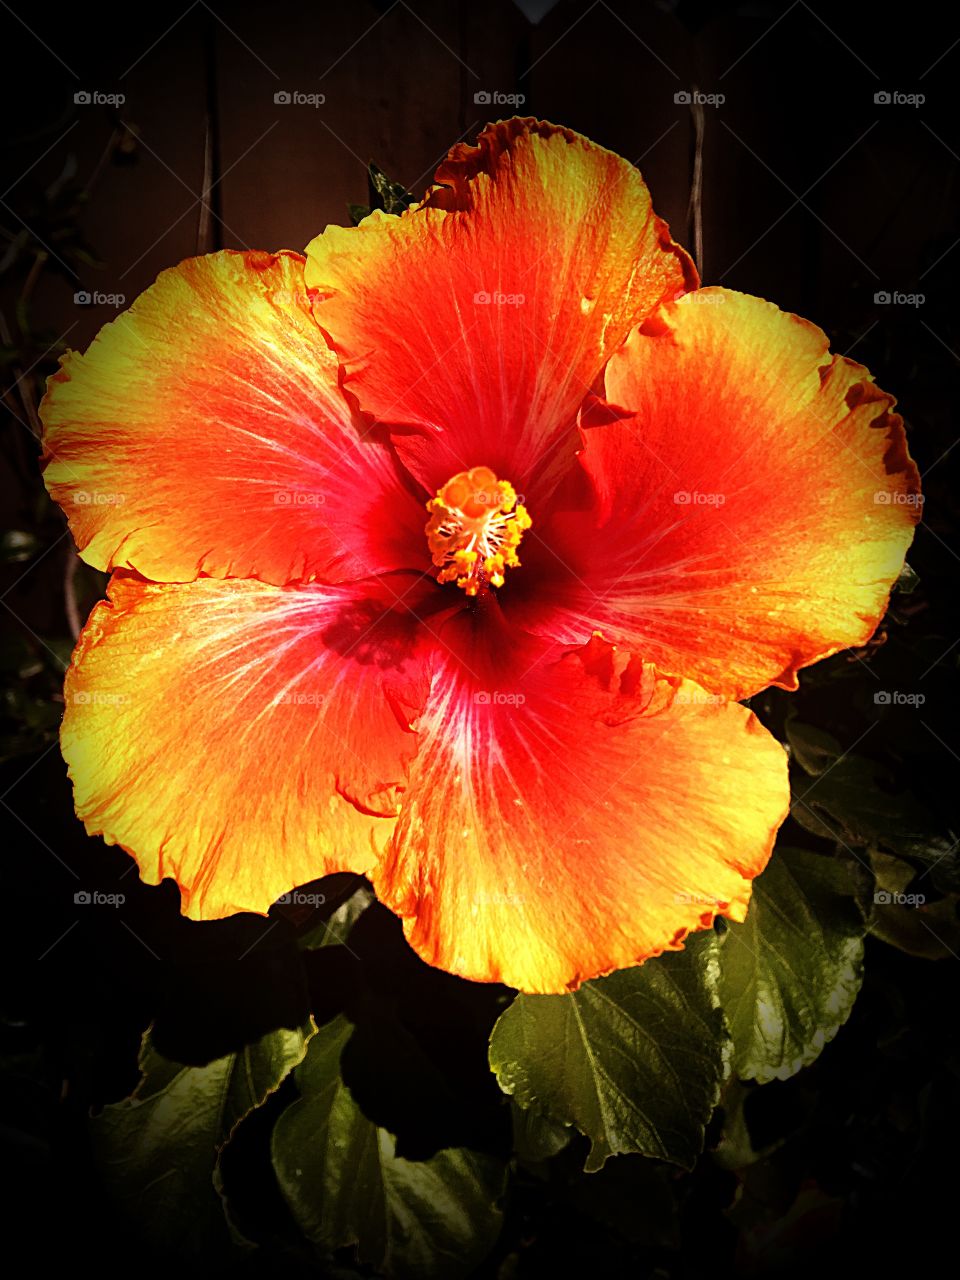 The natural beauty of Hibiscus